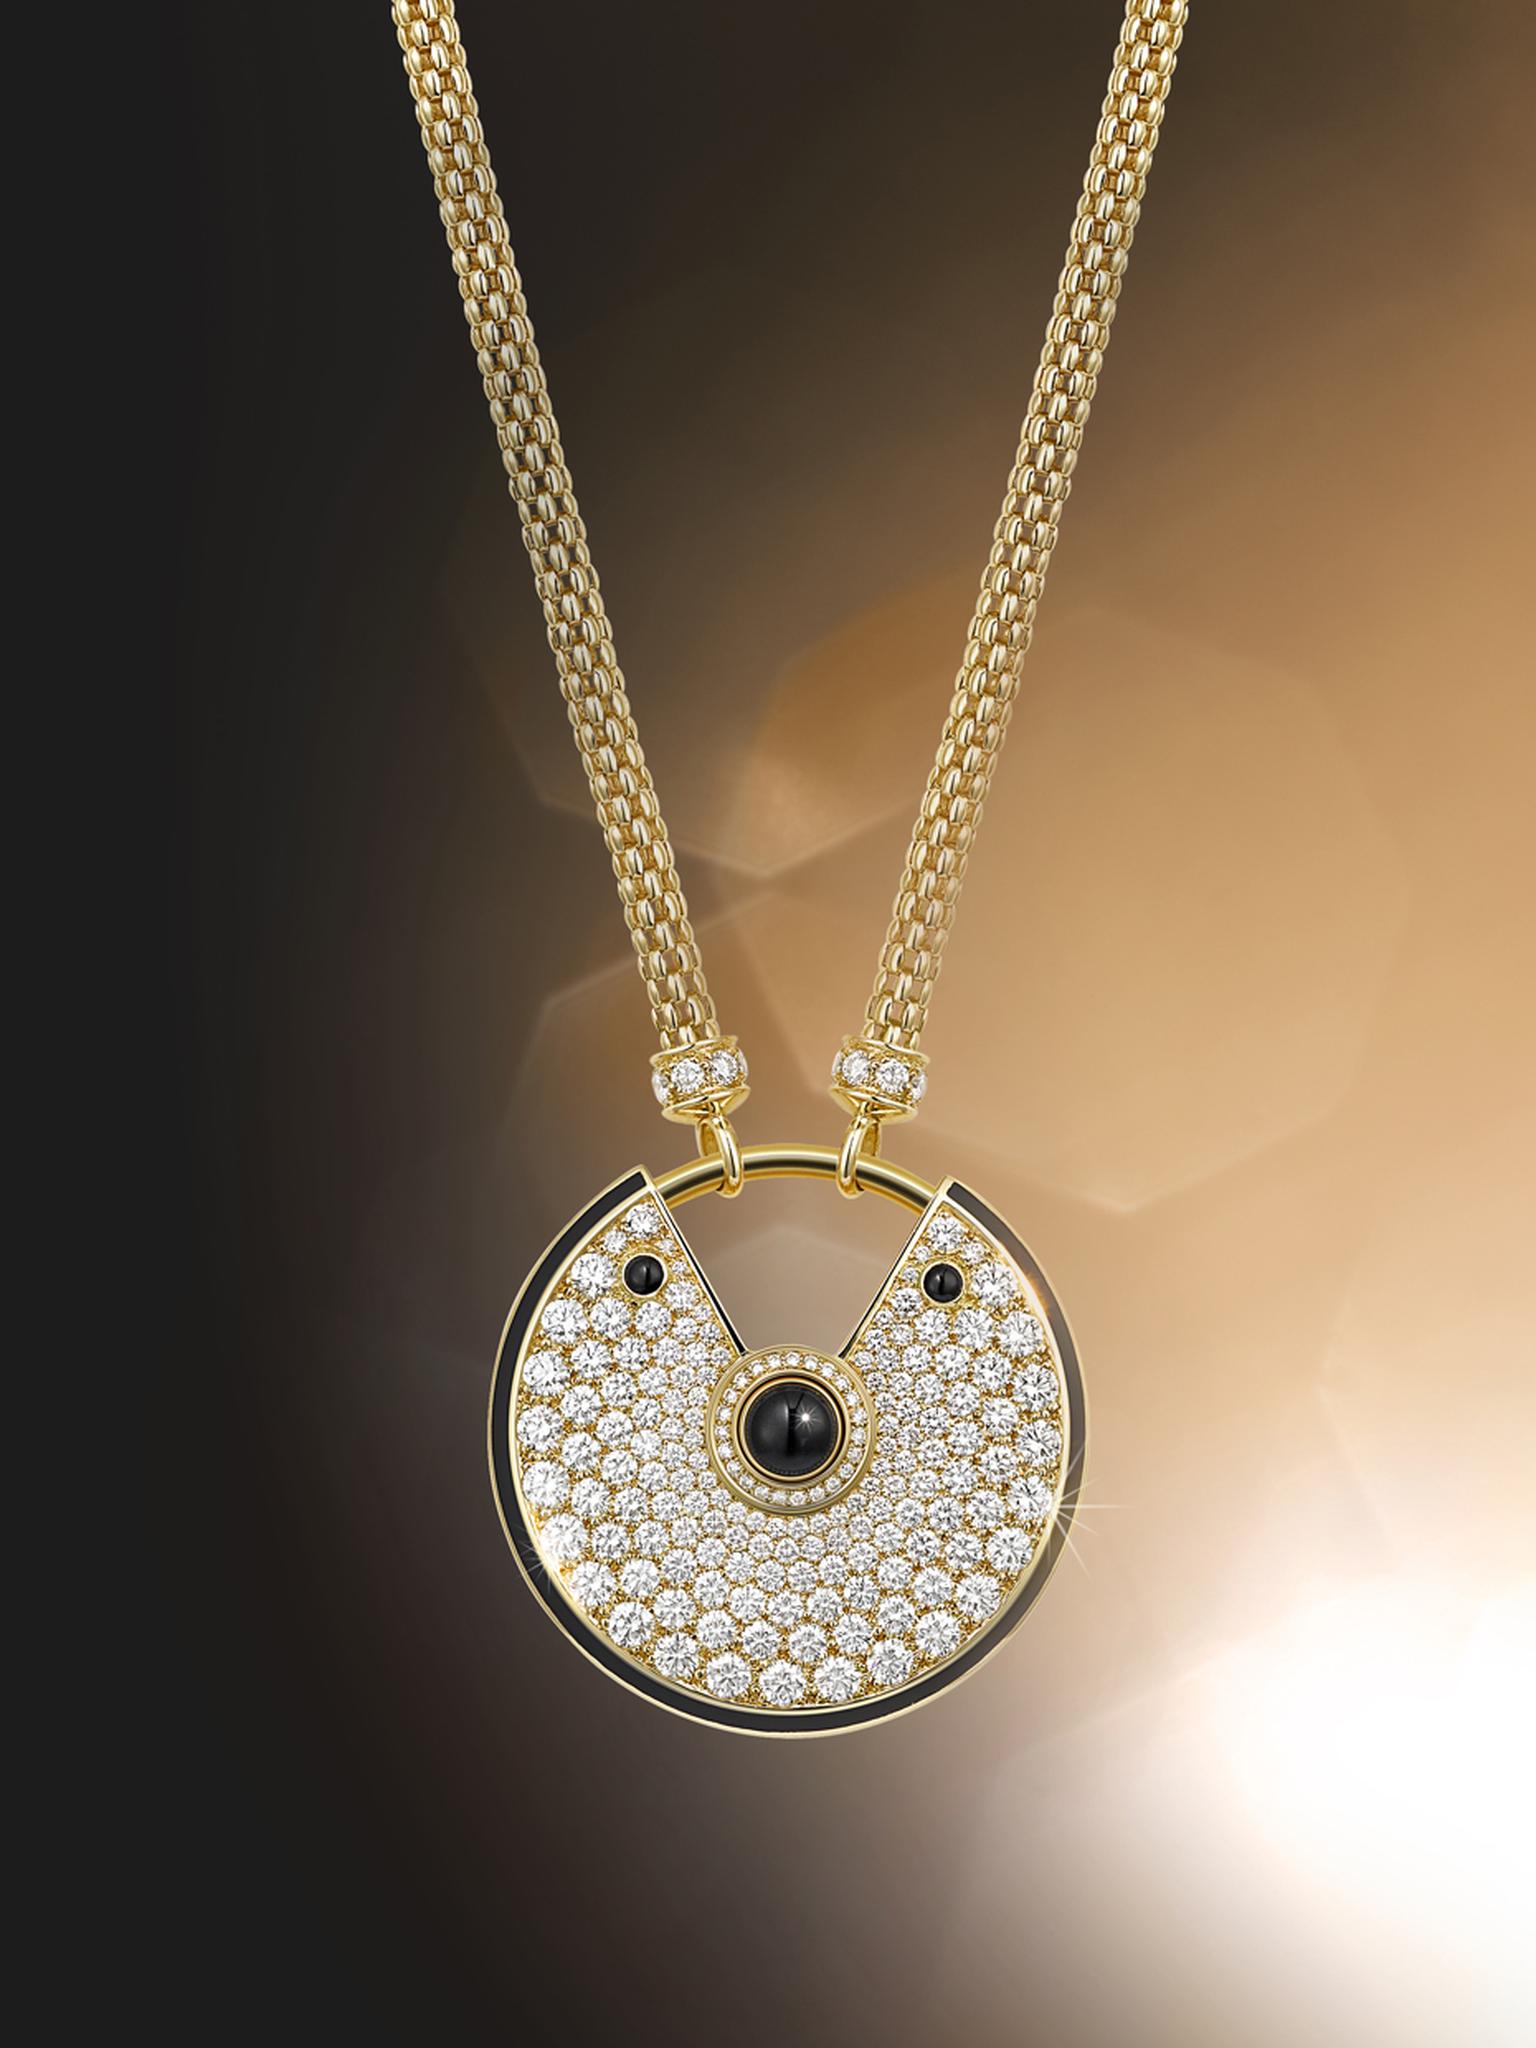 Amulette de Cartier large gold and black lacquer pendant with diamonds and three onyx cabochons.